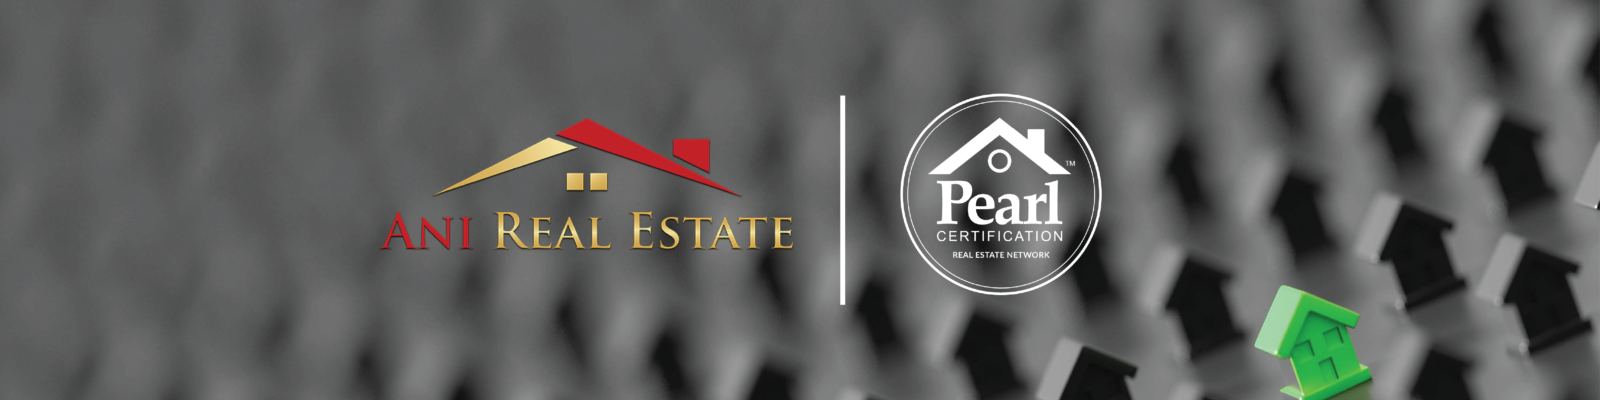 Pearl Certification partners with Ani Real Estate.